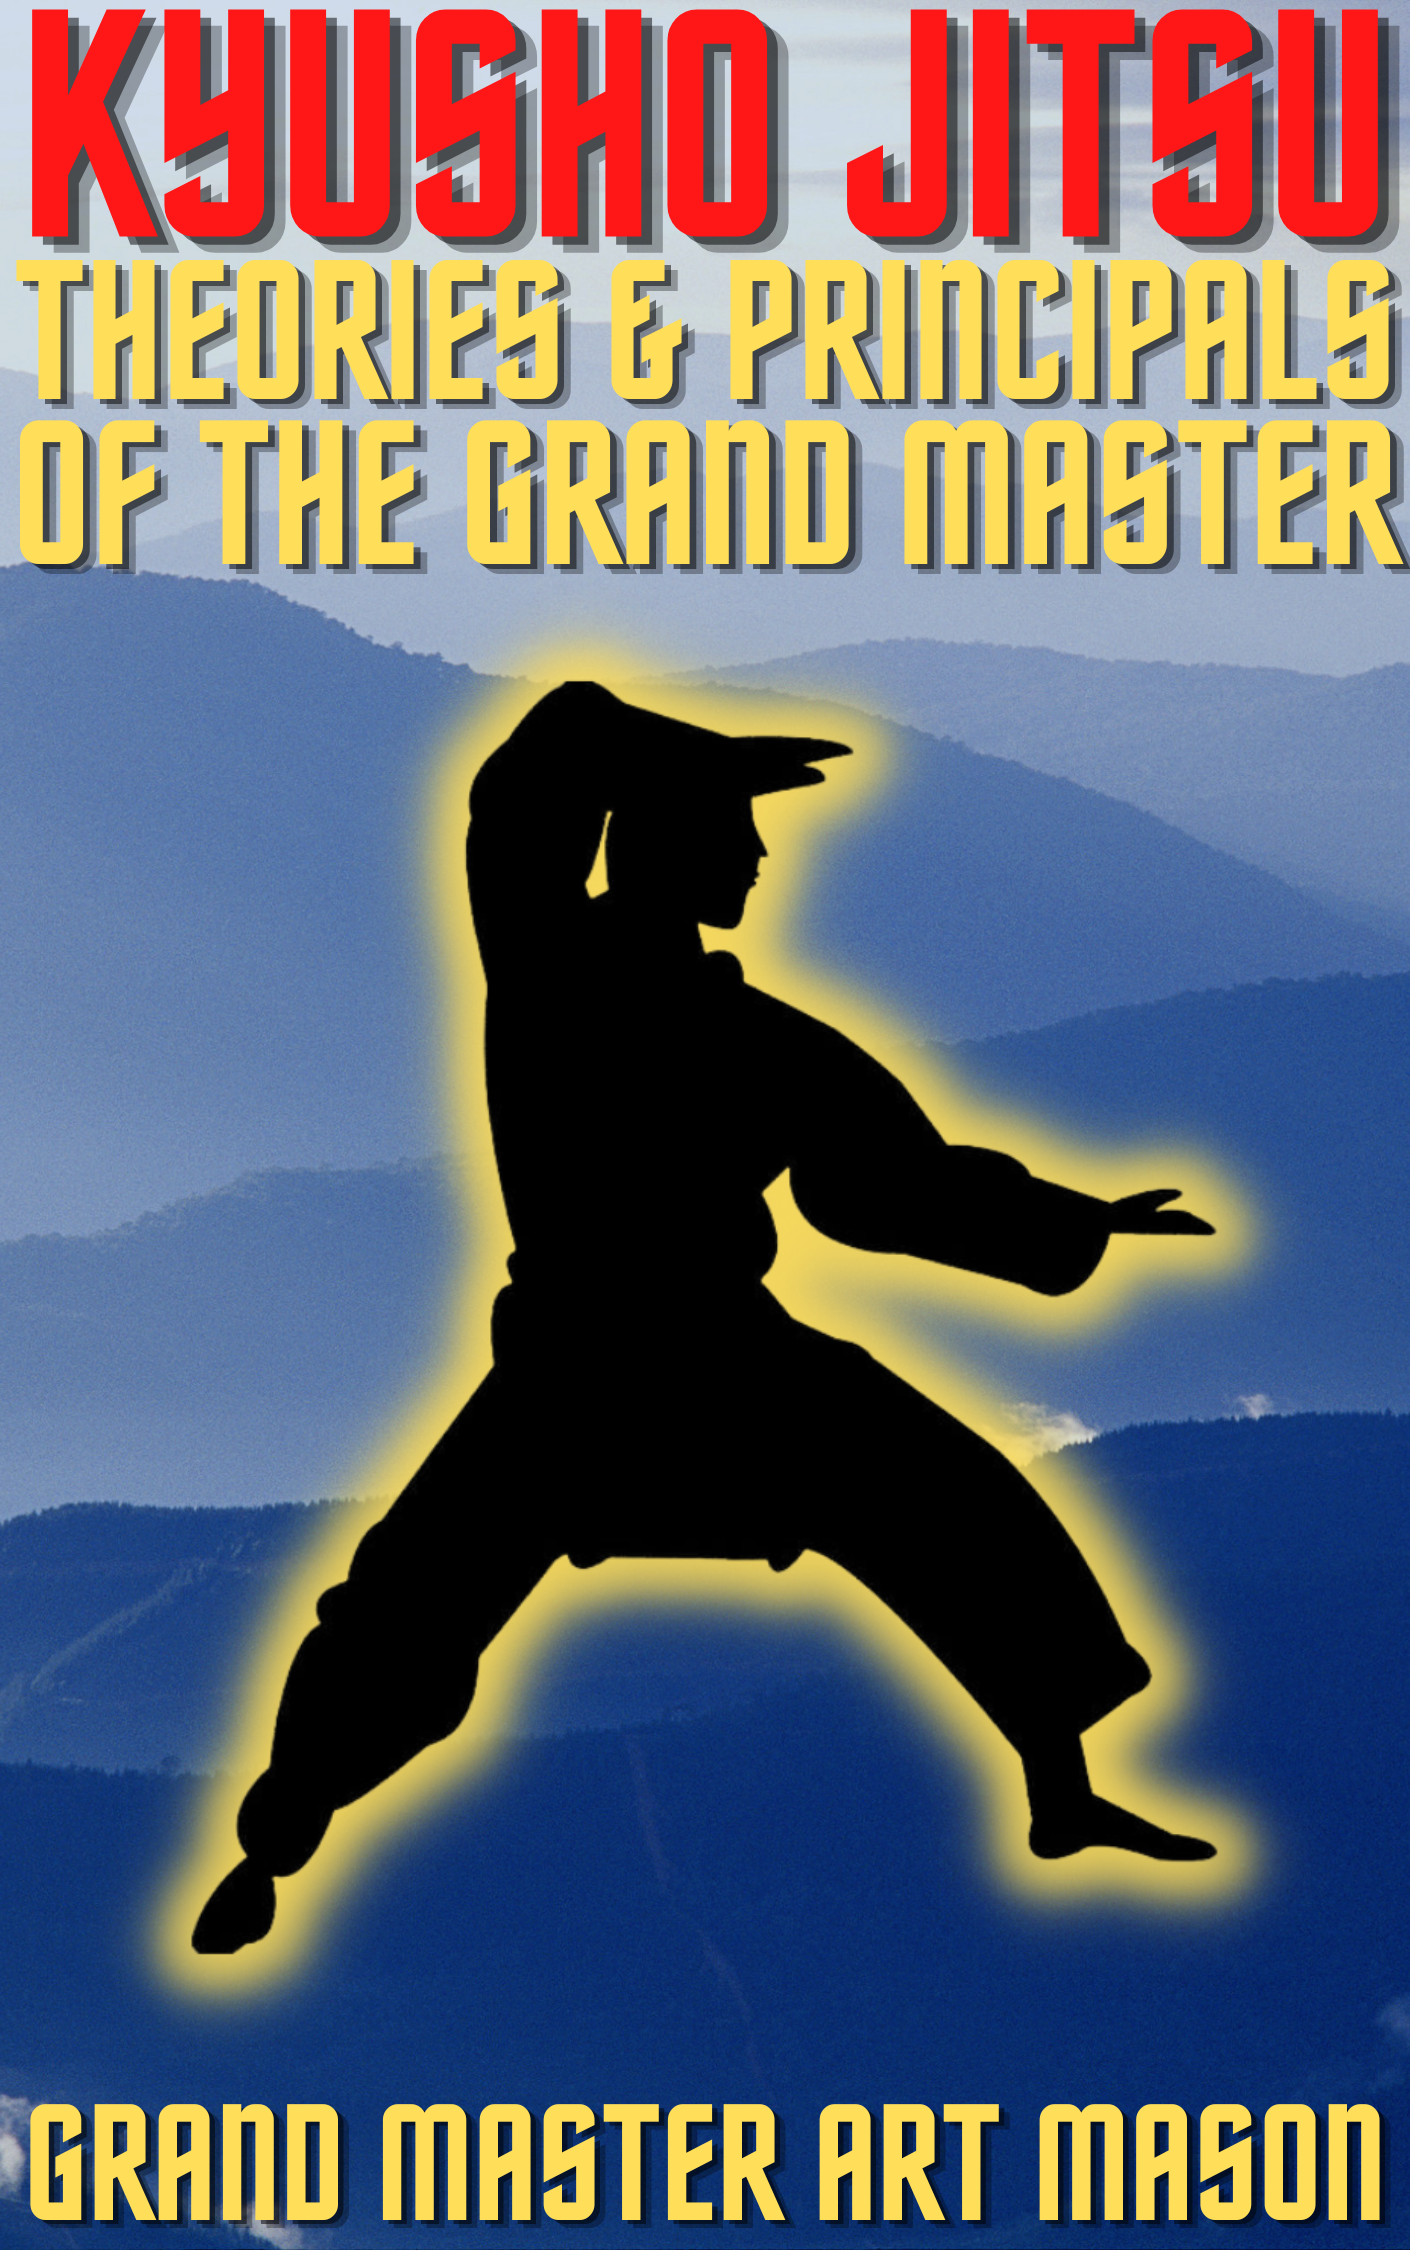 * Principles of the Grand Master